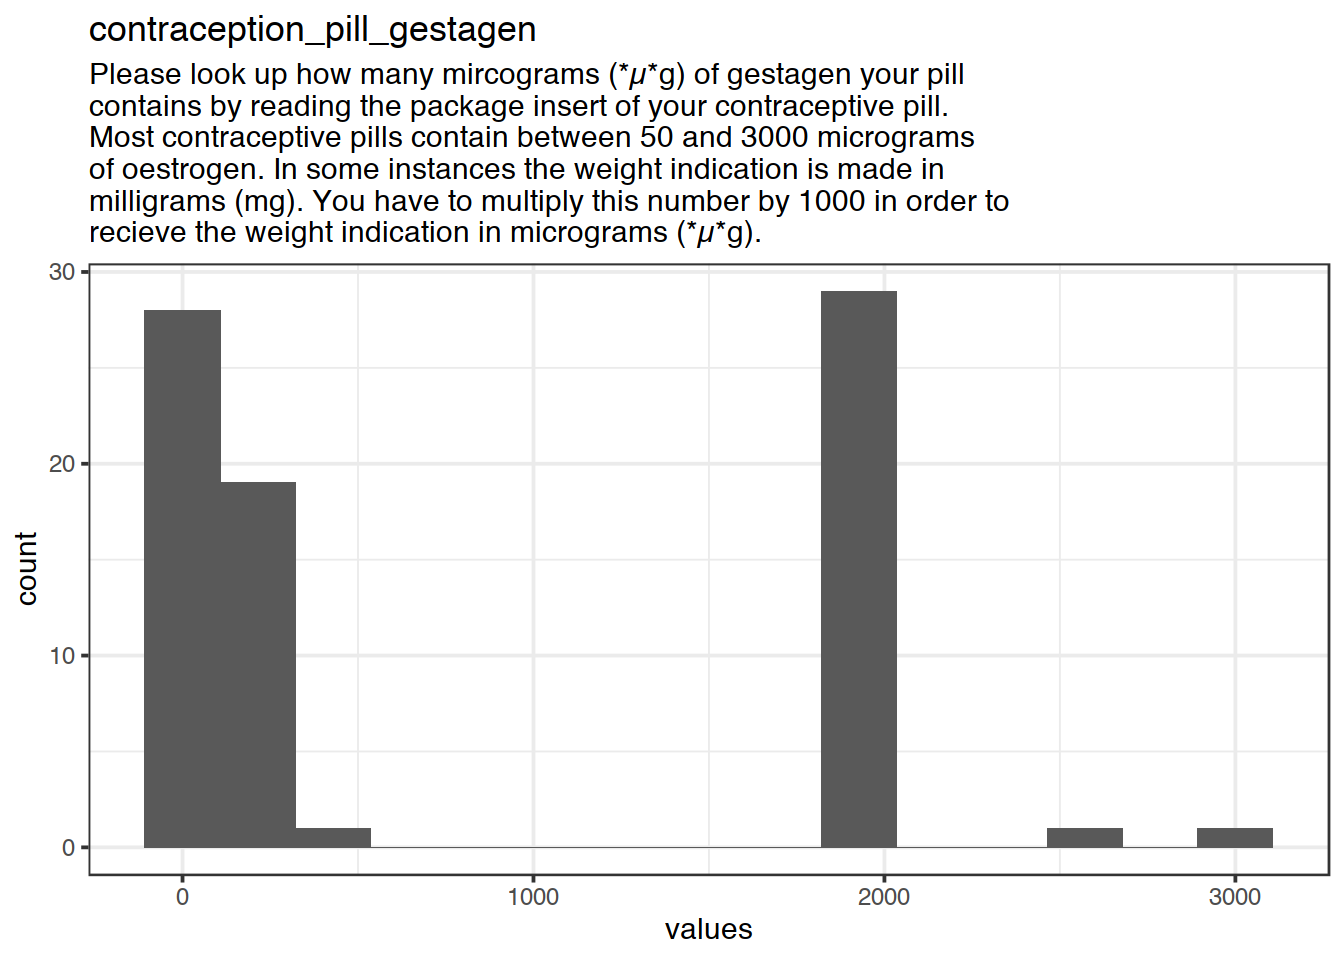 Distribution of values for contraception_pill_gestagen